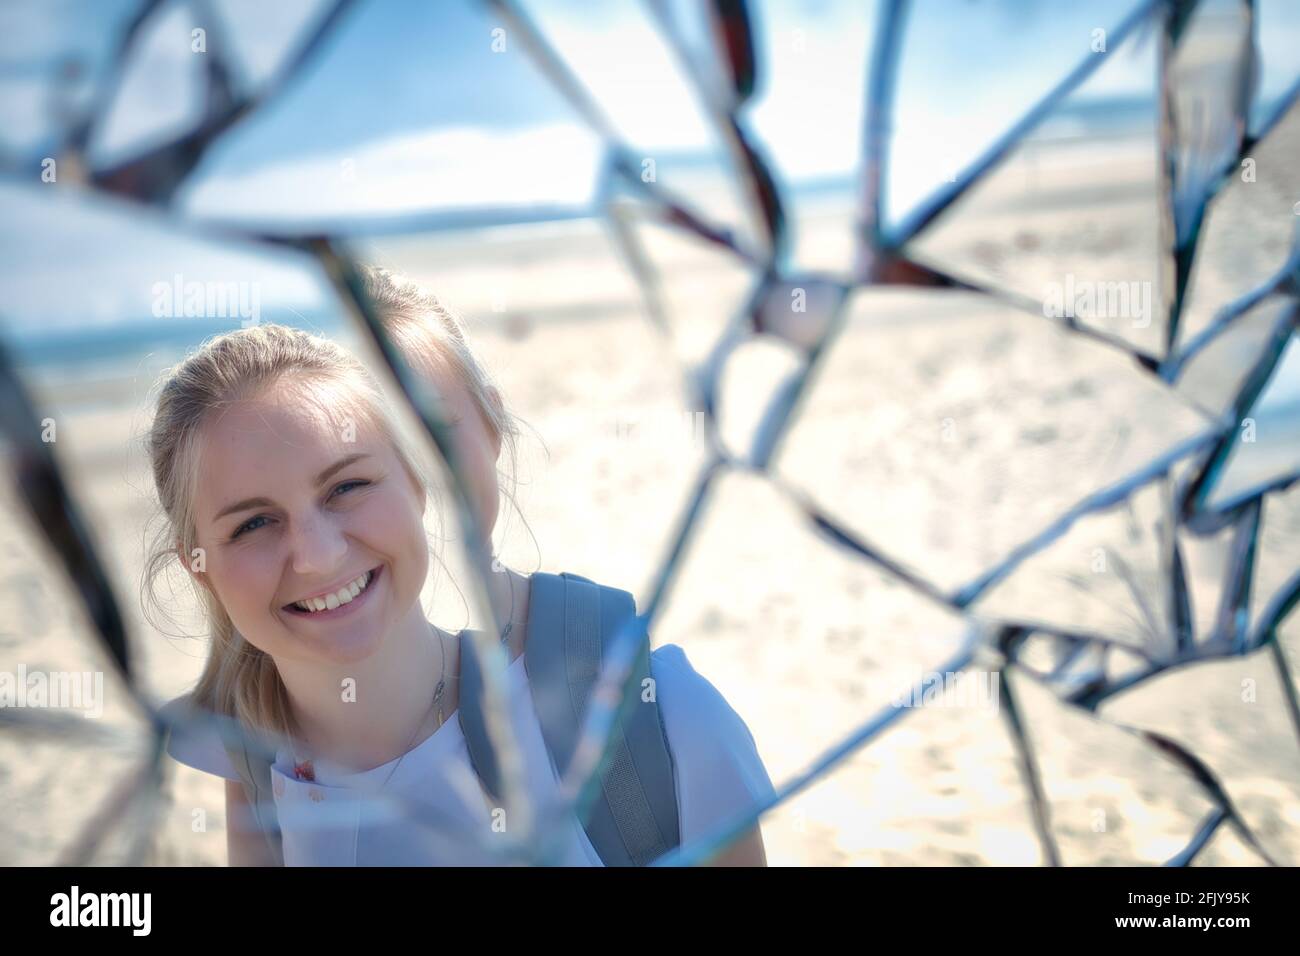 Reflection of a smiling blonde girl in a broken mirror - Stock Photo